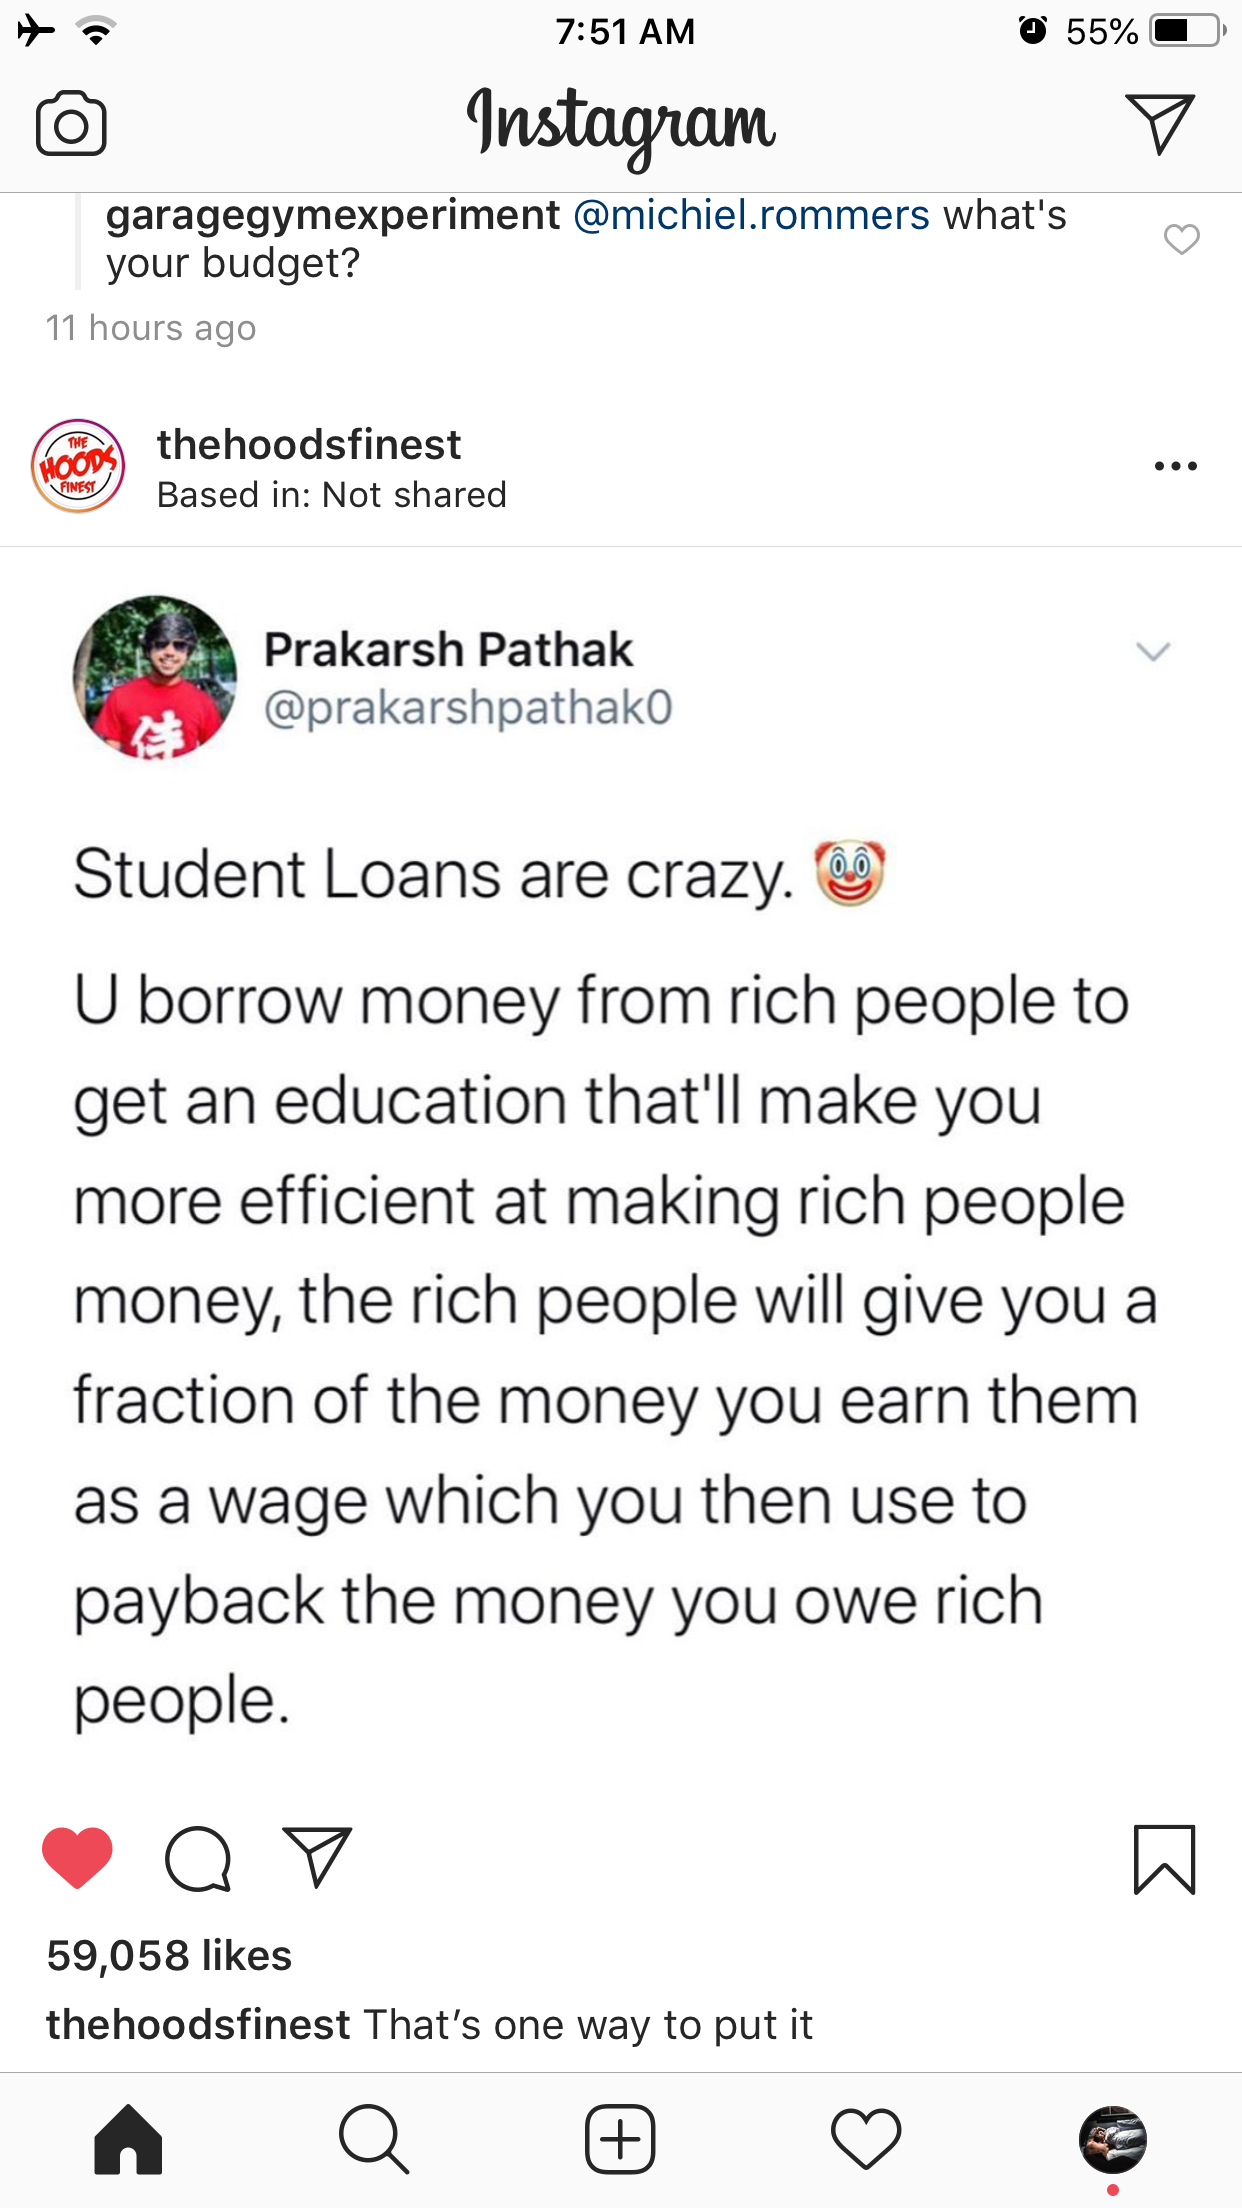 instagram - 55% lo Instagram garagegymexperiment .rommers what's your budget? 11 hours ago ... thehoodsfinest Based in Not d Prakarsh Pathak Student Loans are crazy. U borrow money from rich people to get an education that'll make you more efficient at ma